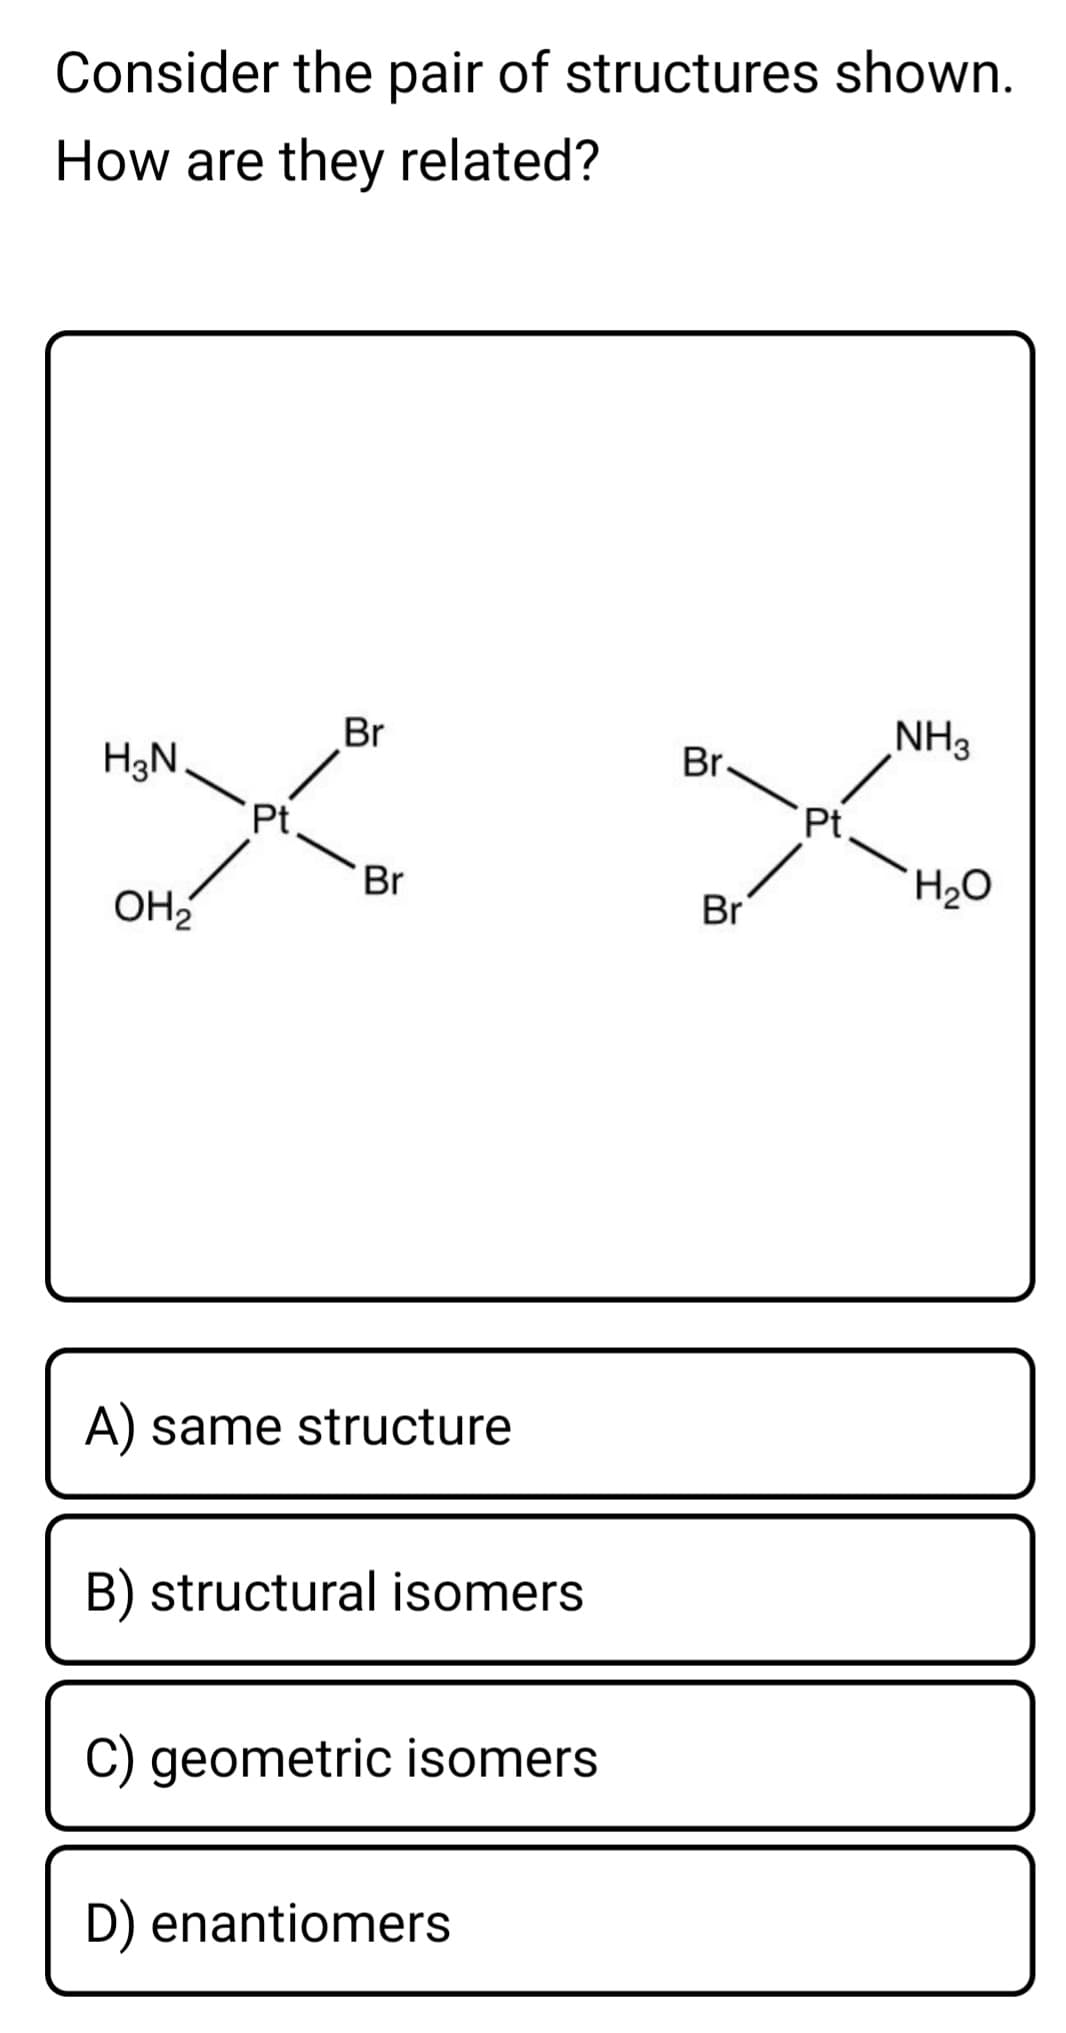 Consider the pair of structures shown.
How are they related?
NH3
Br
Br.
H3N
Pt
Pt.
Br
Br
OH2
A) same structure
B) structural isomers
C) geometric isomers
D) enantiomers
